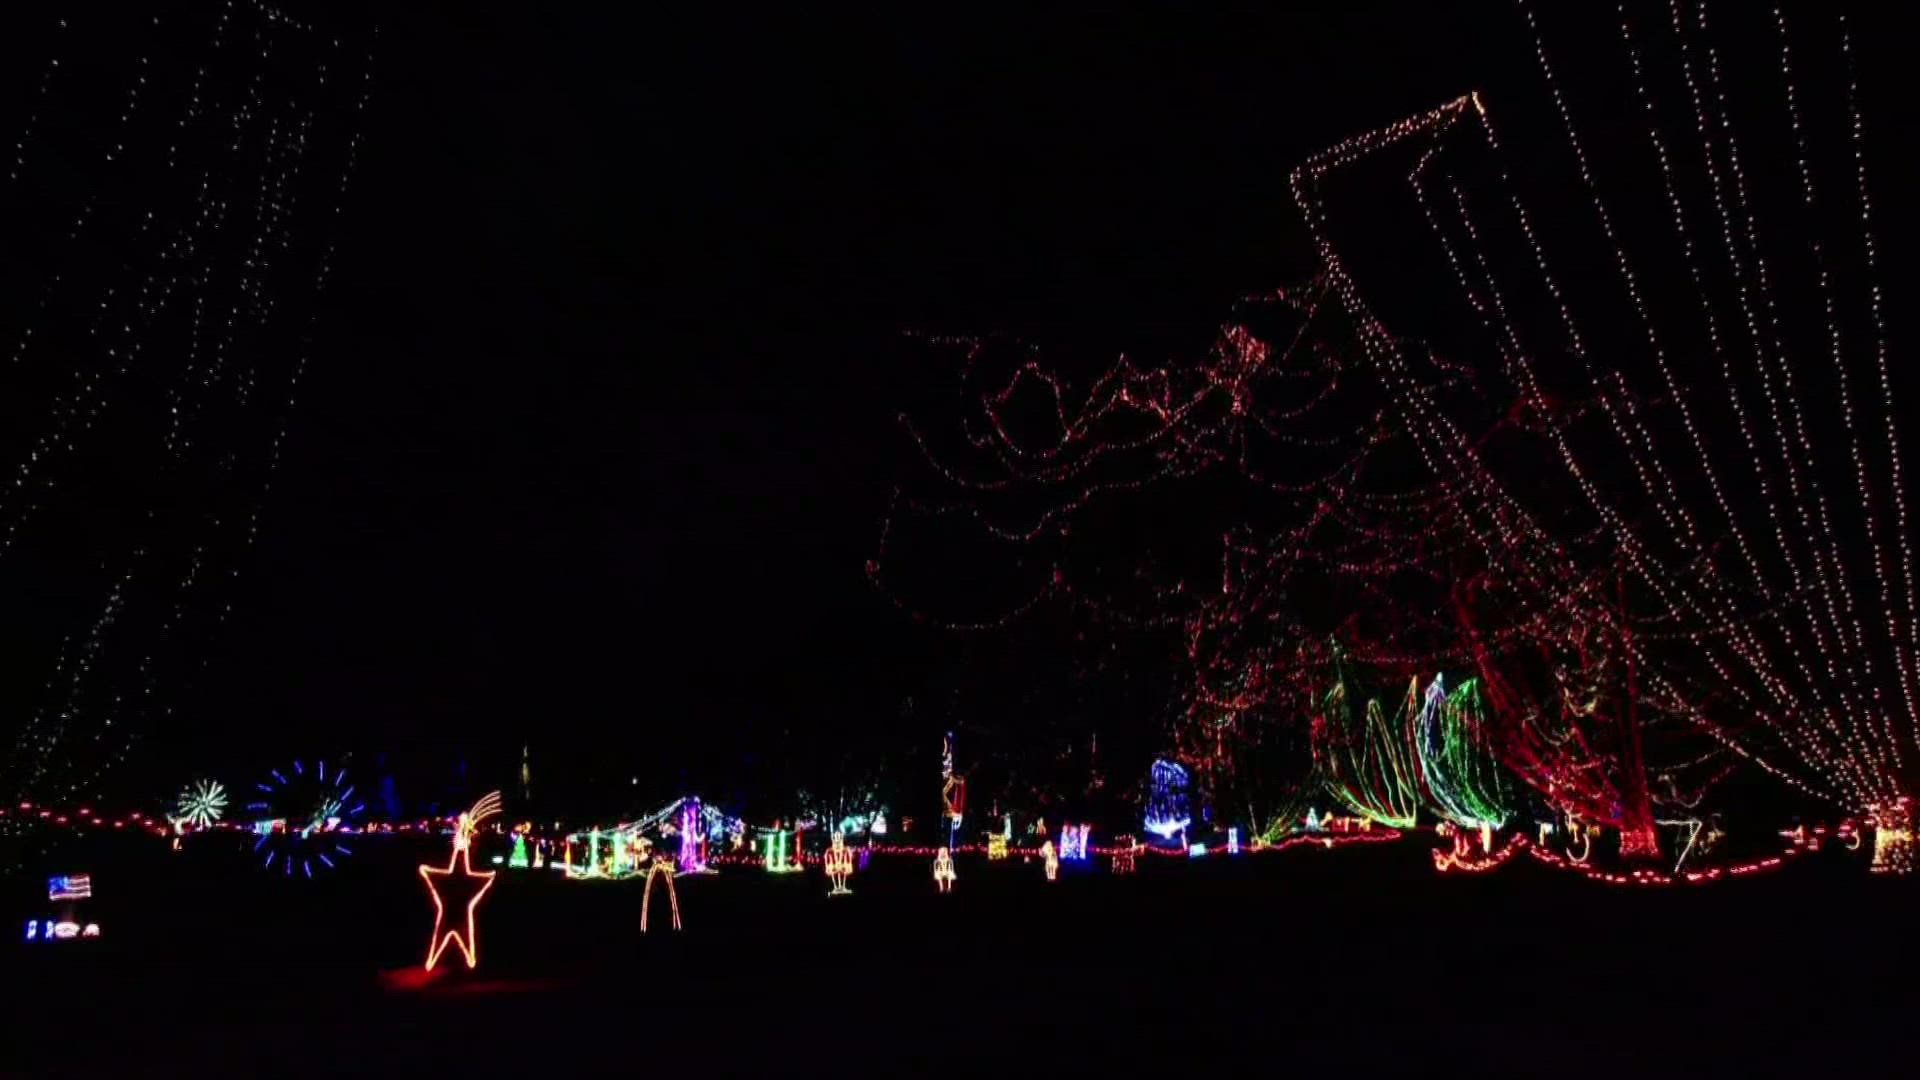 The 37th annual light display at Tilles Park will open 6:30 p.m. Friday to people walking through. The display opens to cars on Nov. 23.